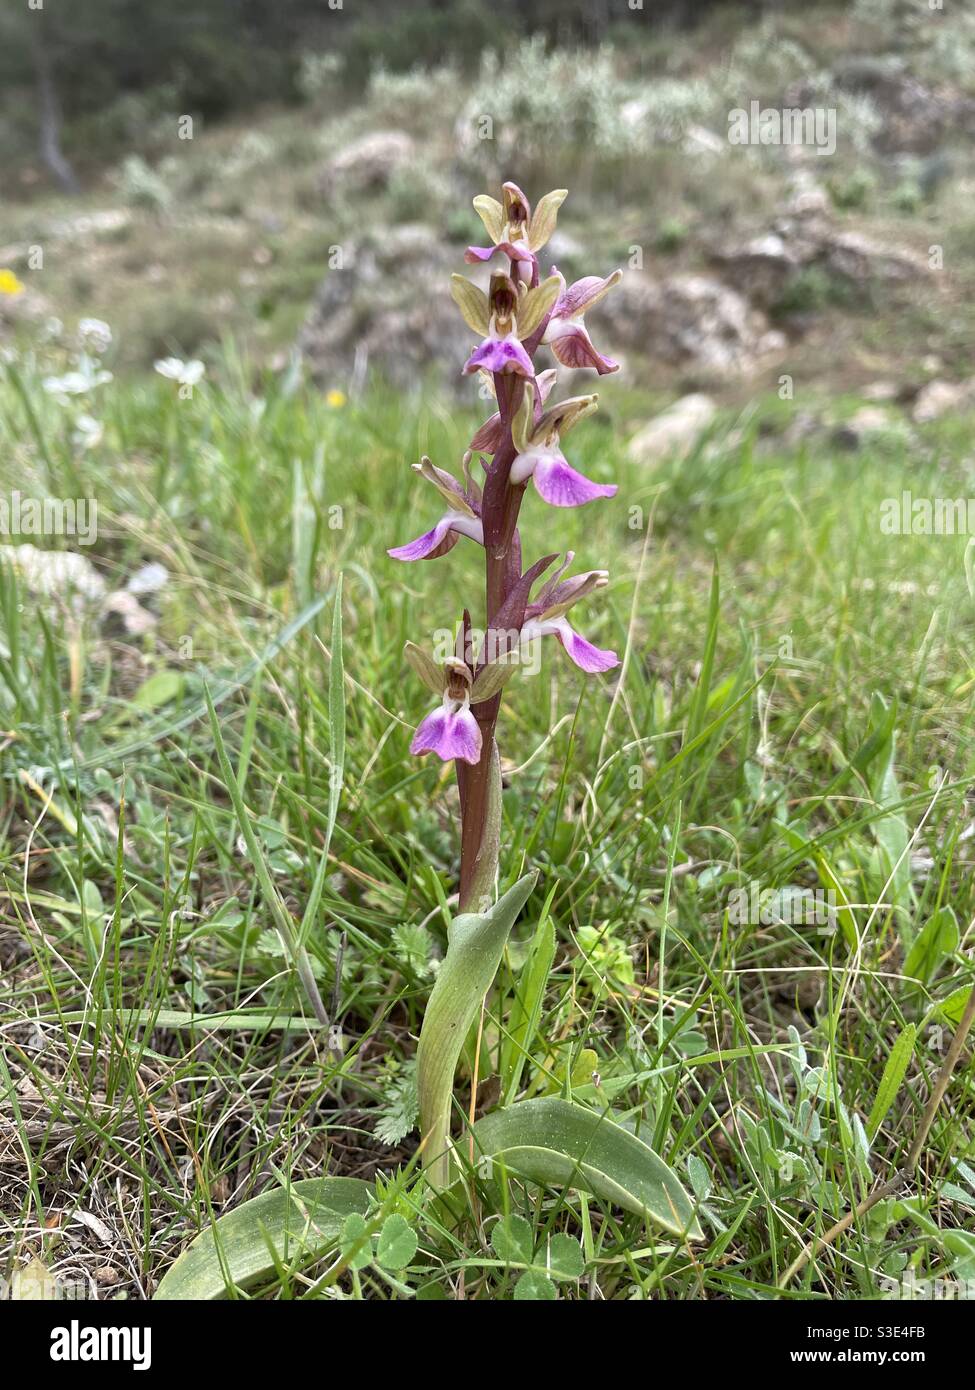 Fan lipped orchid (Anacamptis Collina) Stock Photo